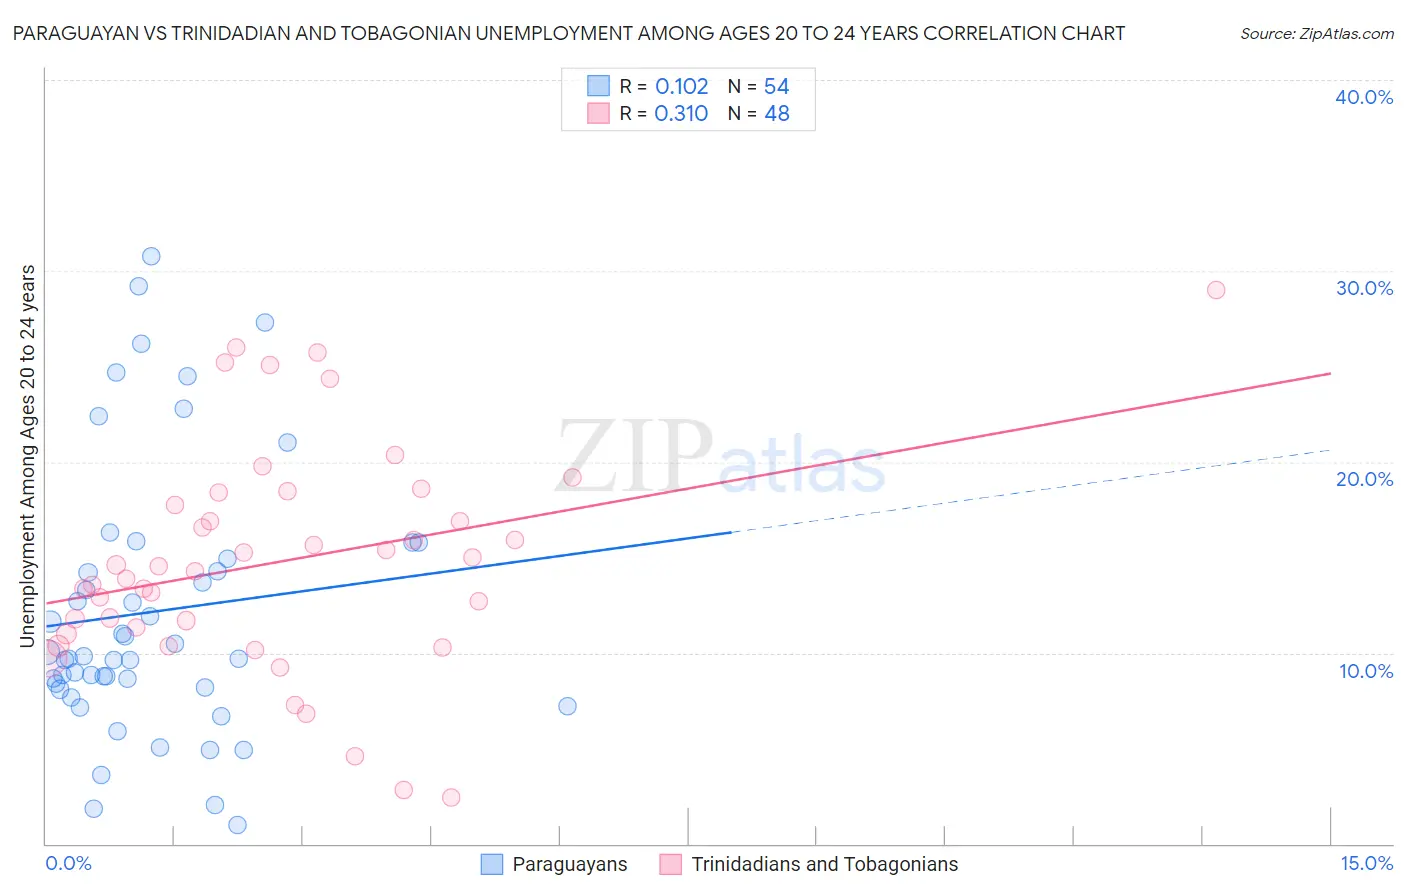 Paraguayan vs Trinidadian and Tobagonian Unemployment Among Ages 20 to 24 years